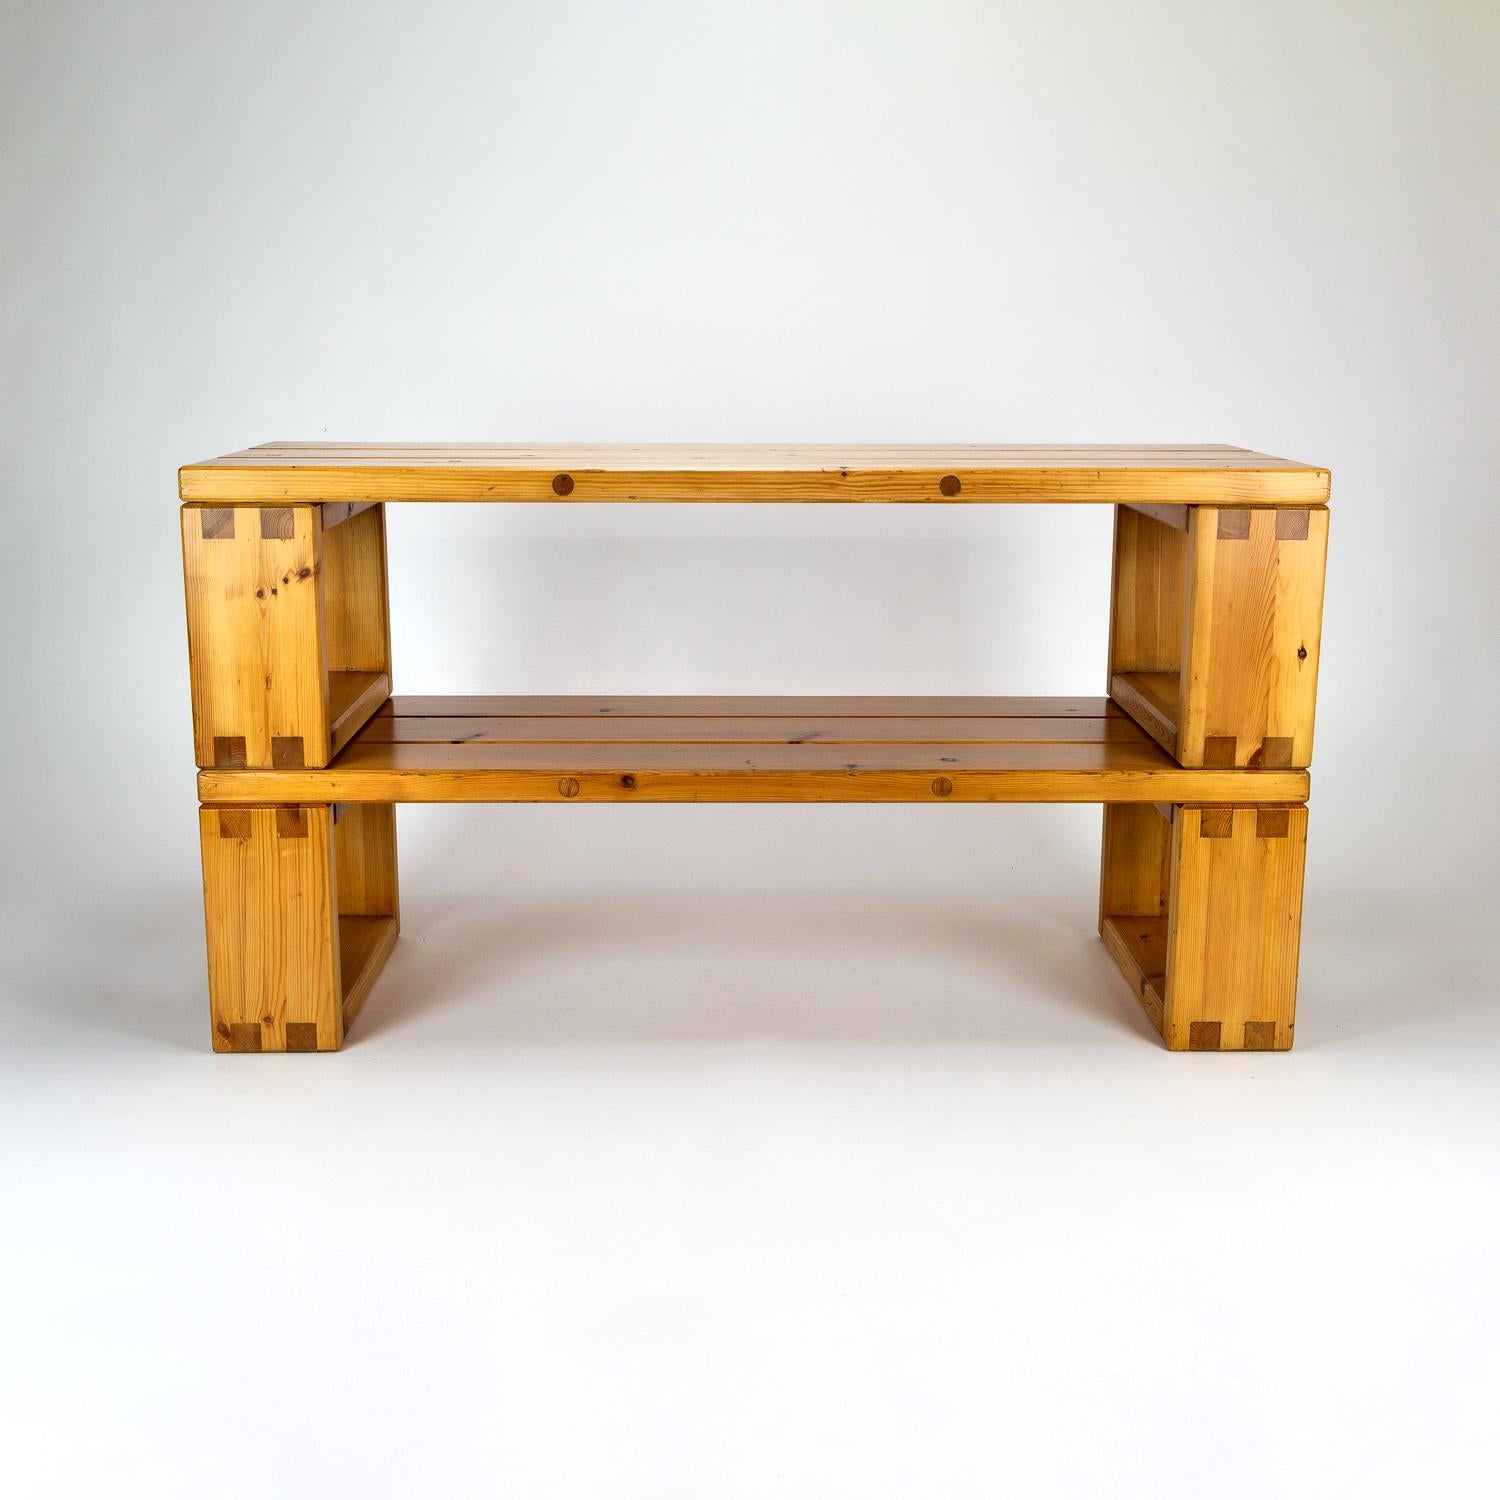 Mid-20th Century Pair of Solid Pine Benches, Sweden, 1960s